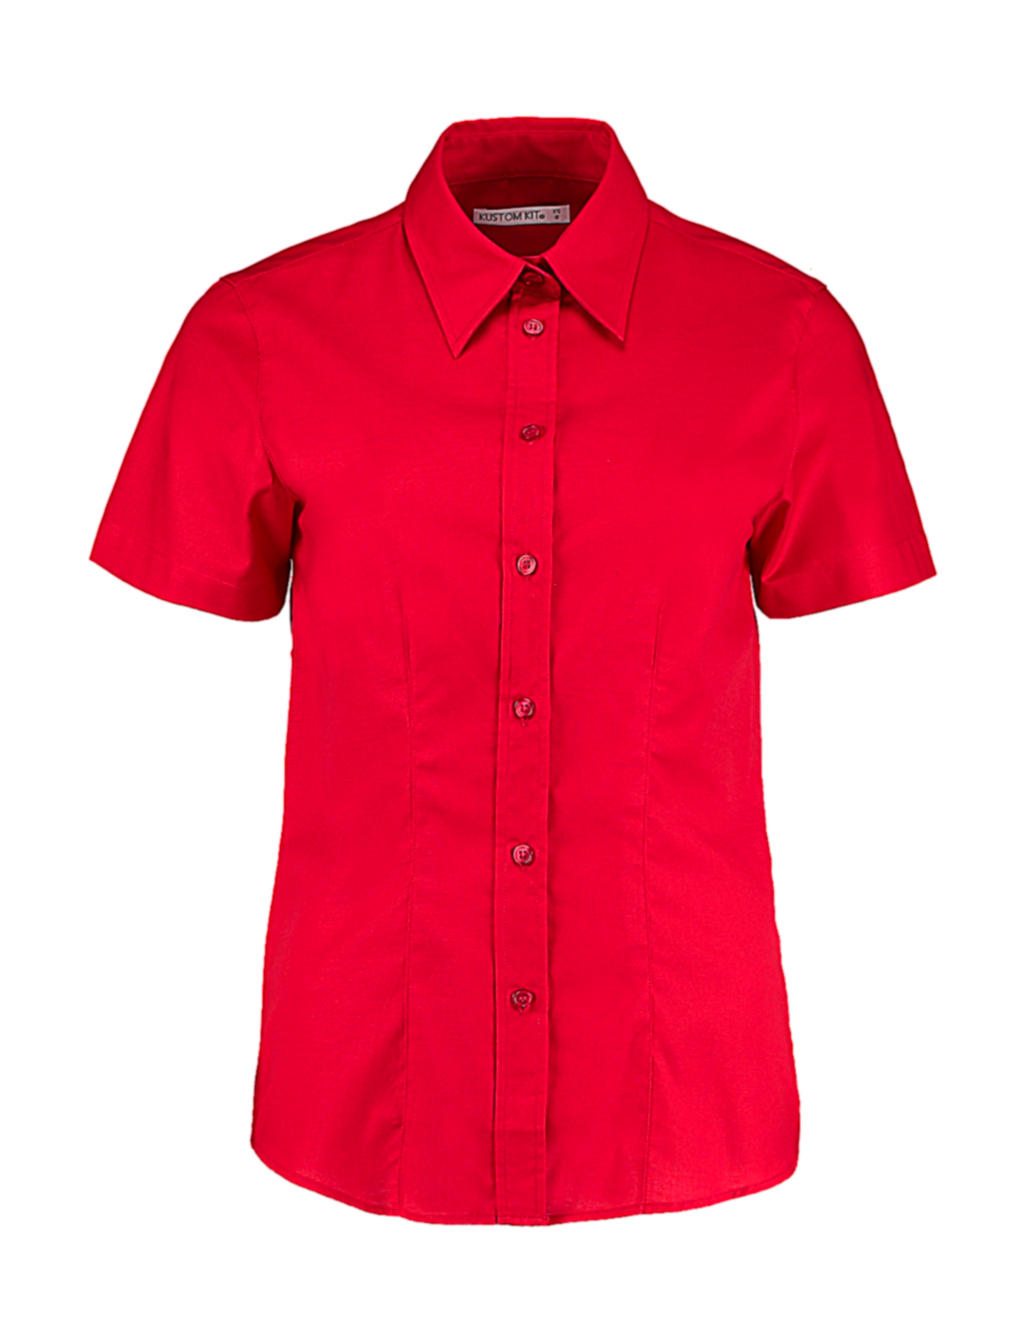  Womens Tailored Fit Workwear Oxford Shirt SSL in Farbe Red